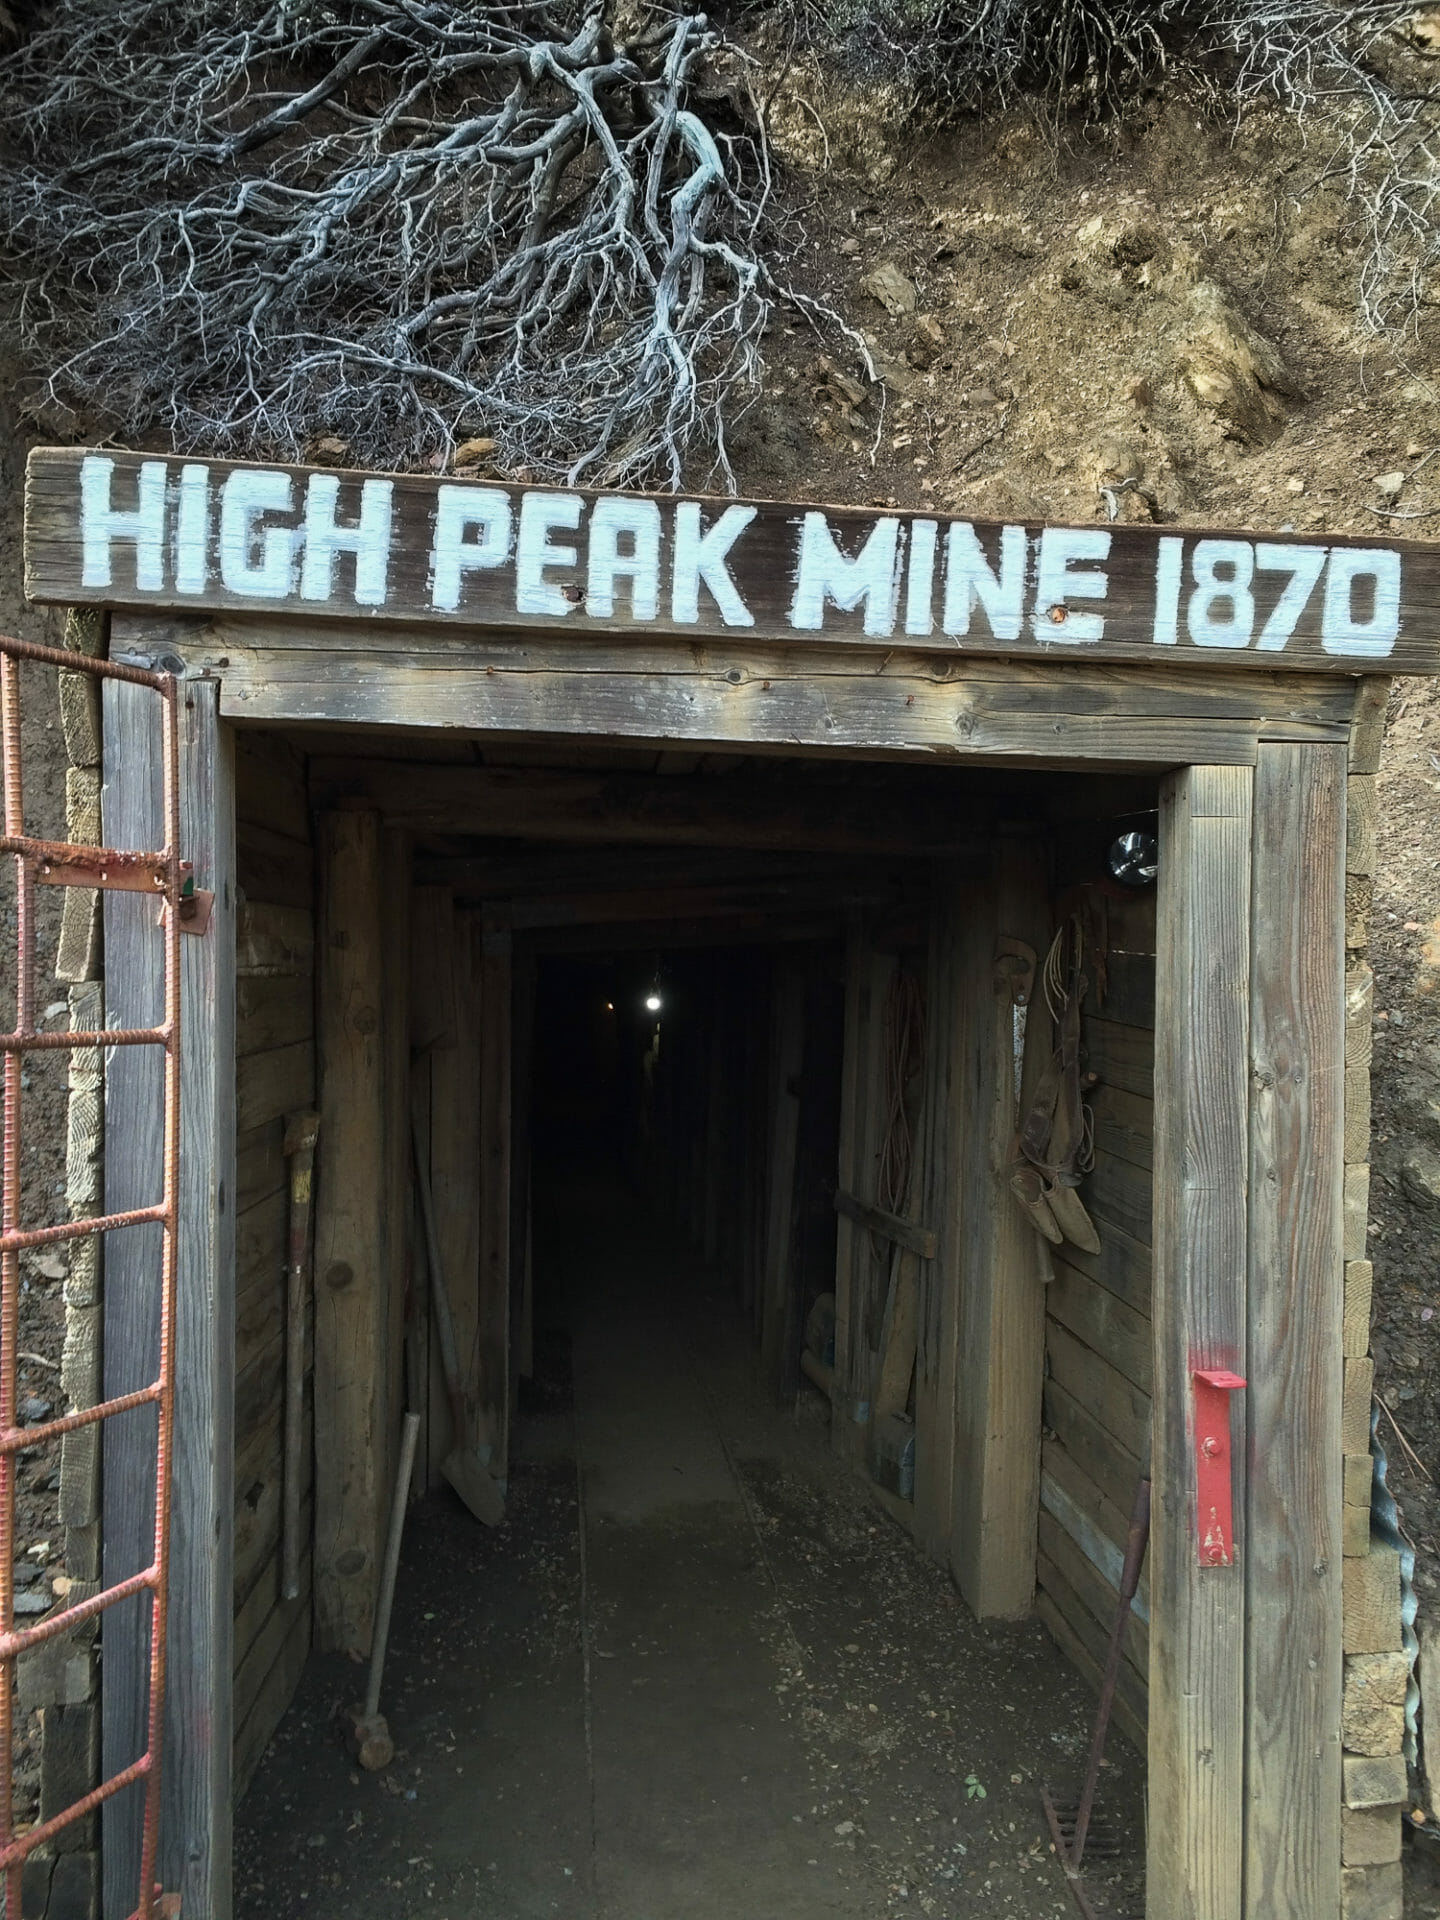 Entrance to the High Peak Mine